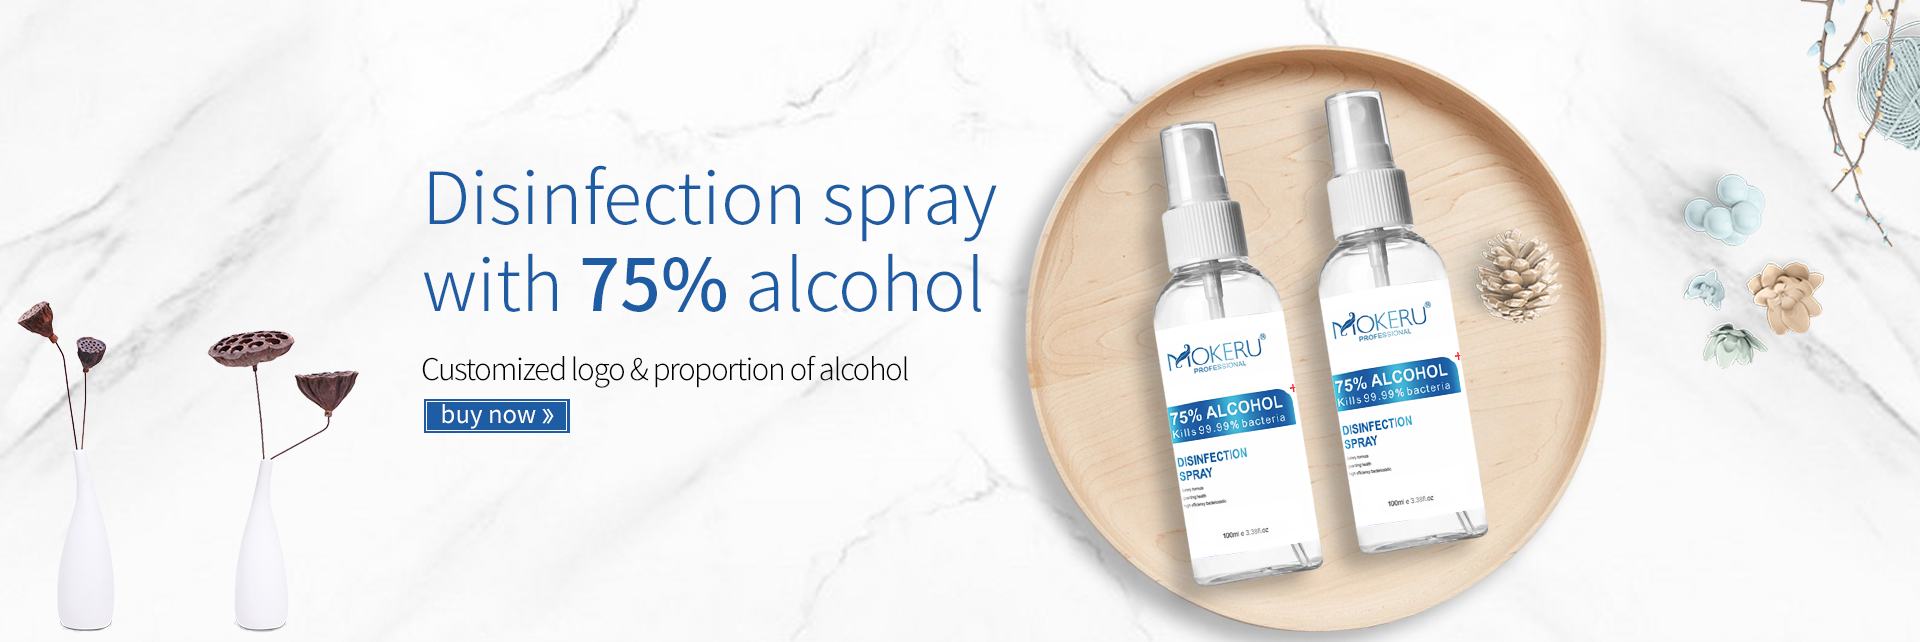 Disinfection alcohol spray